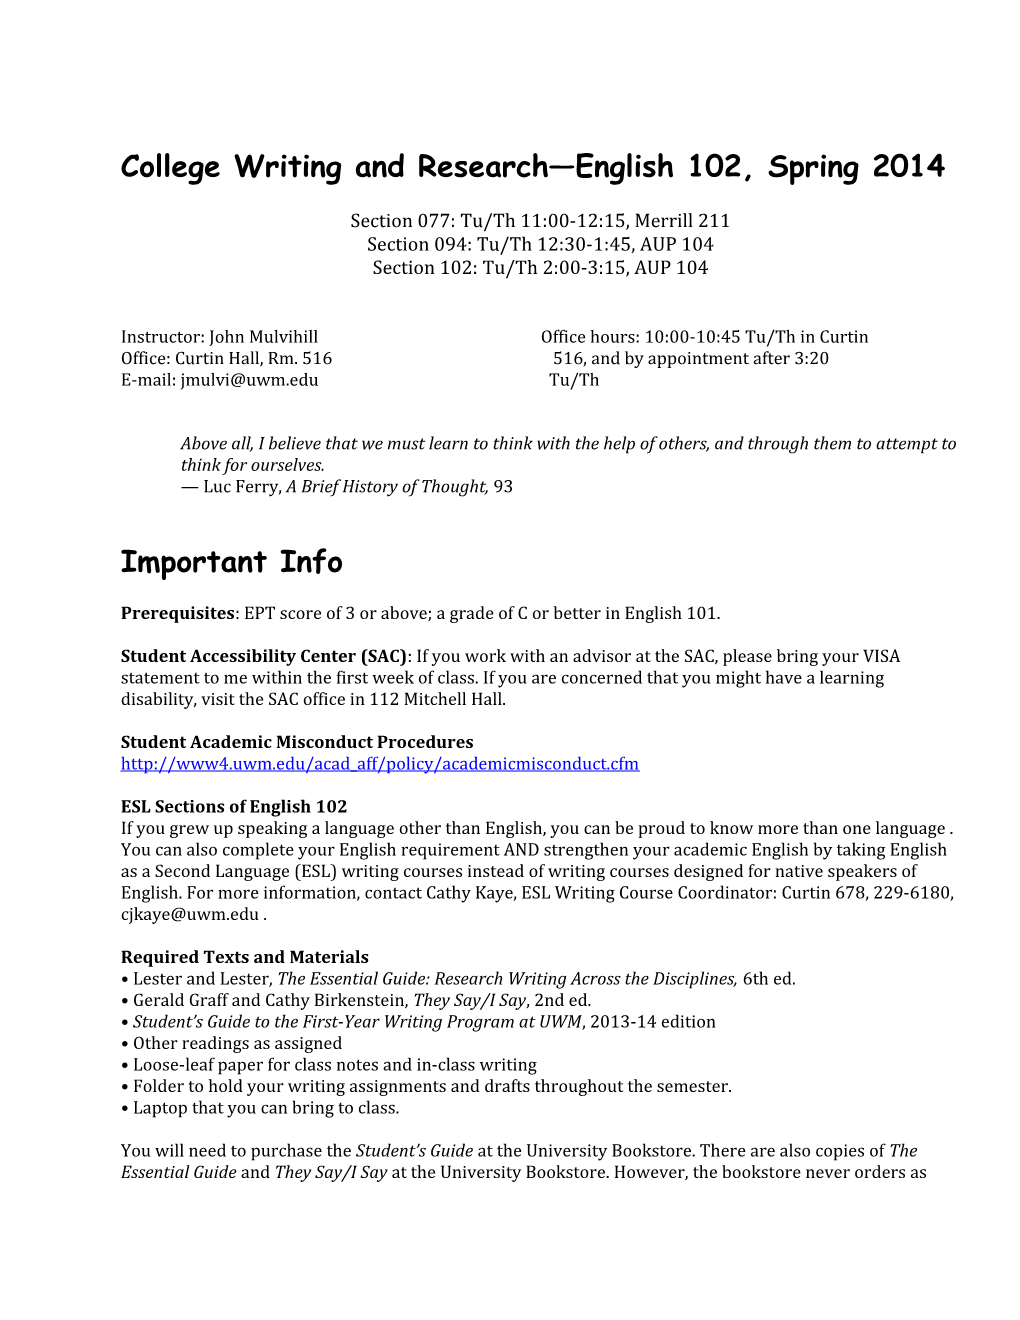 English 102: College Writing and Research